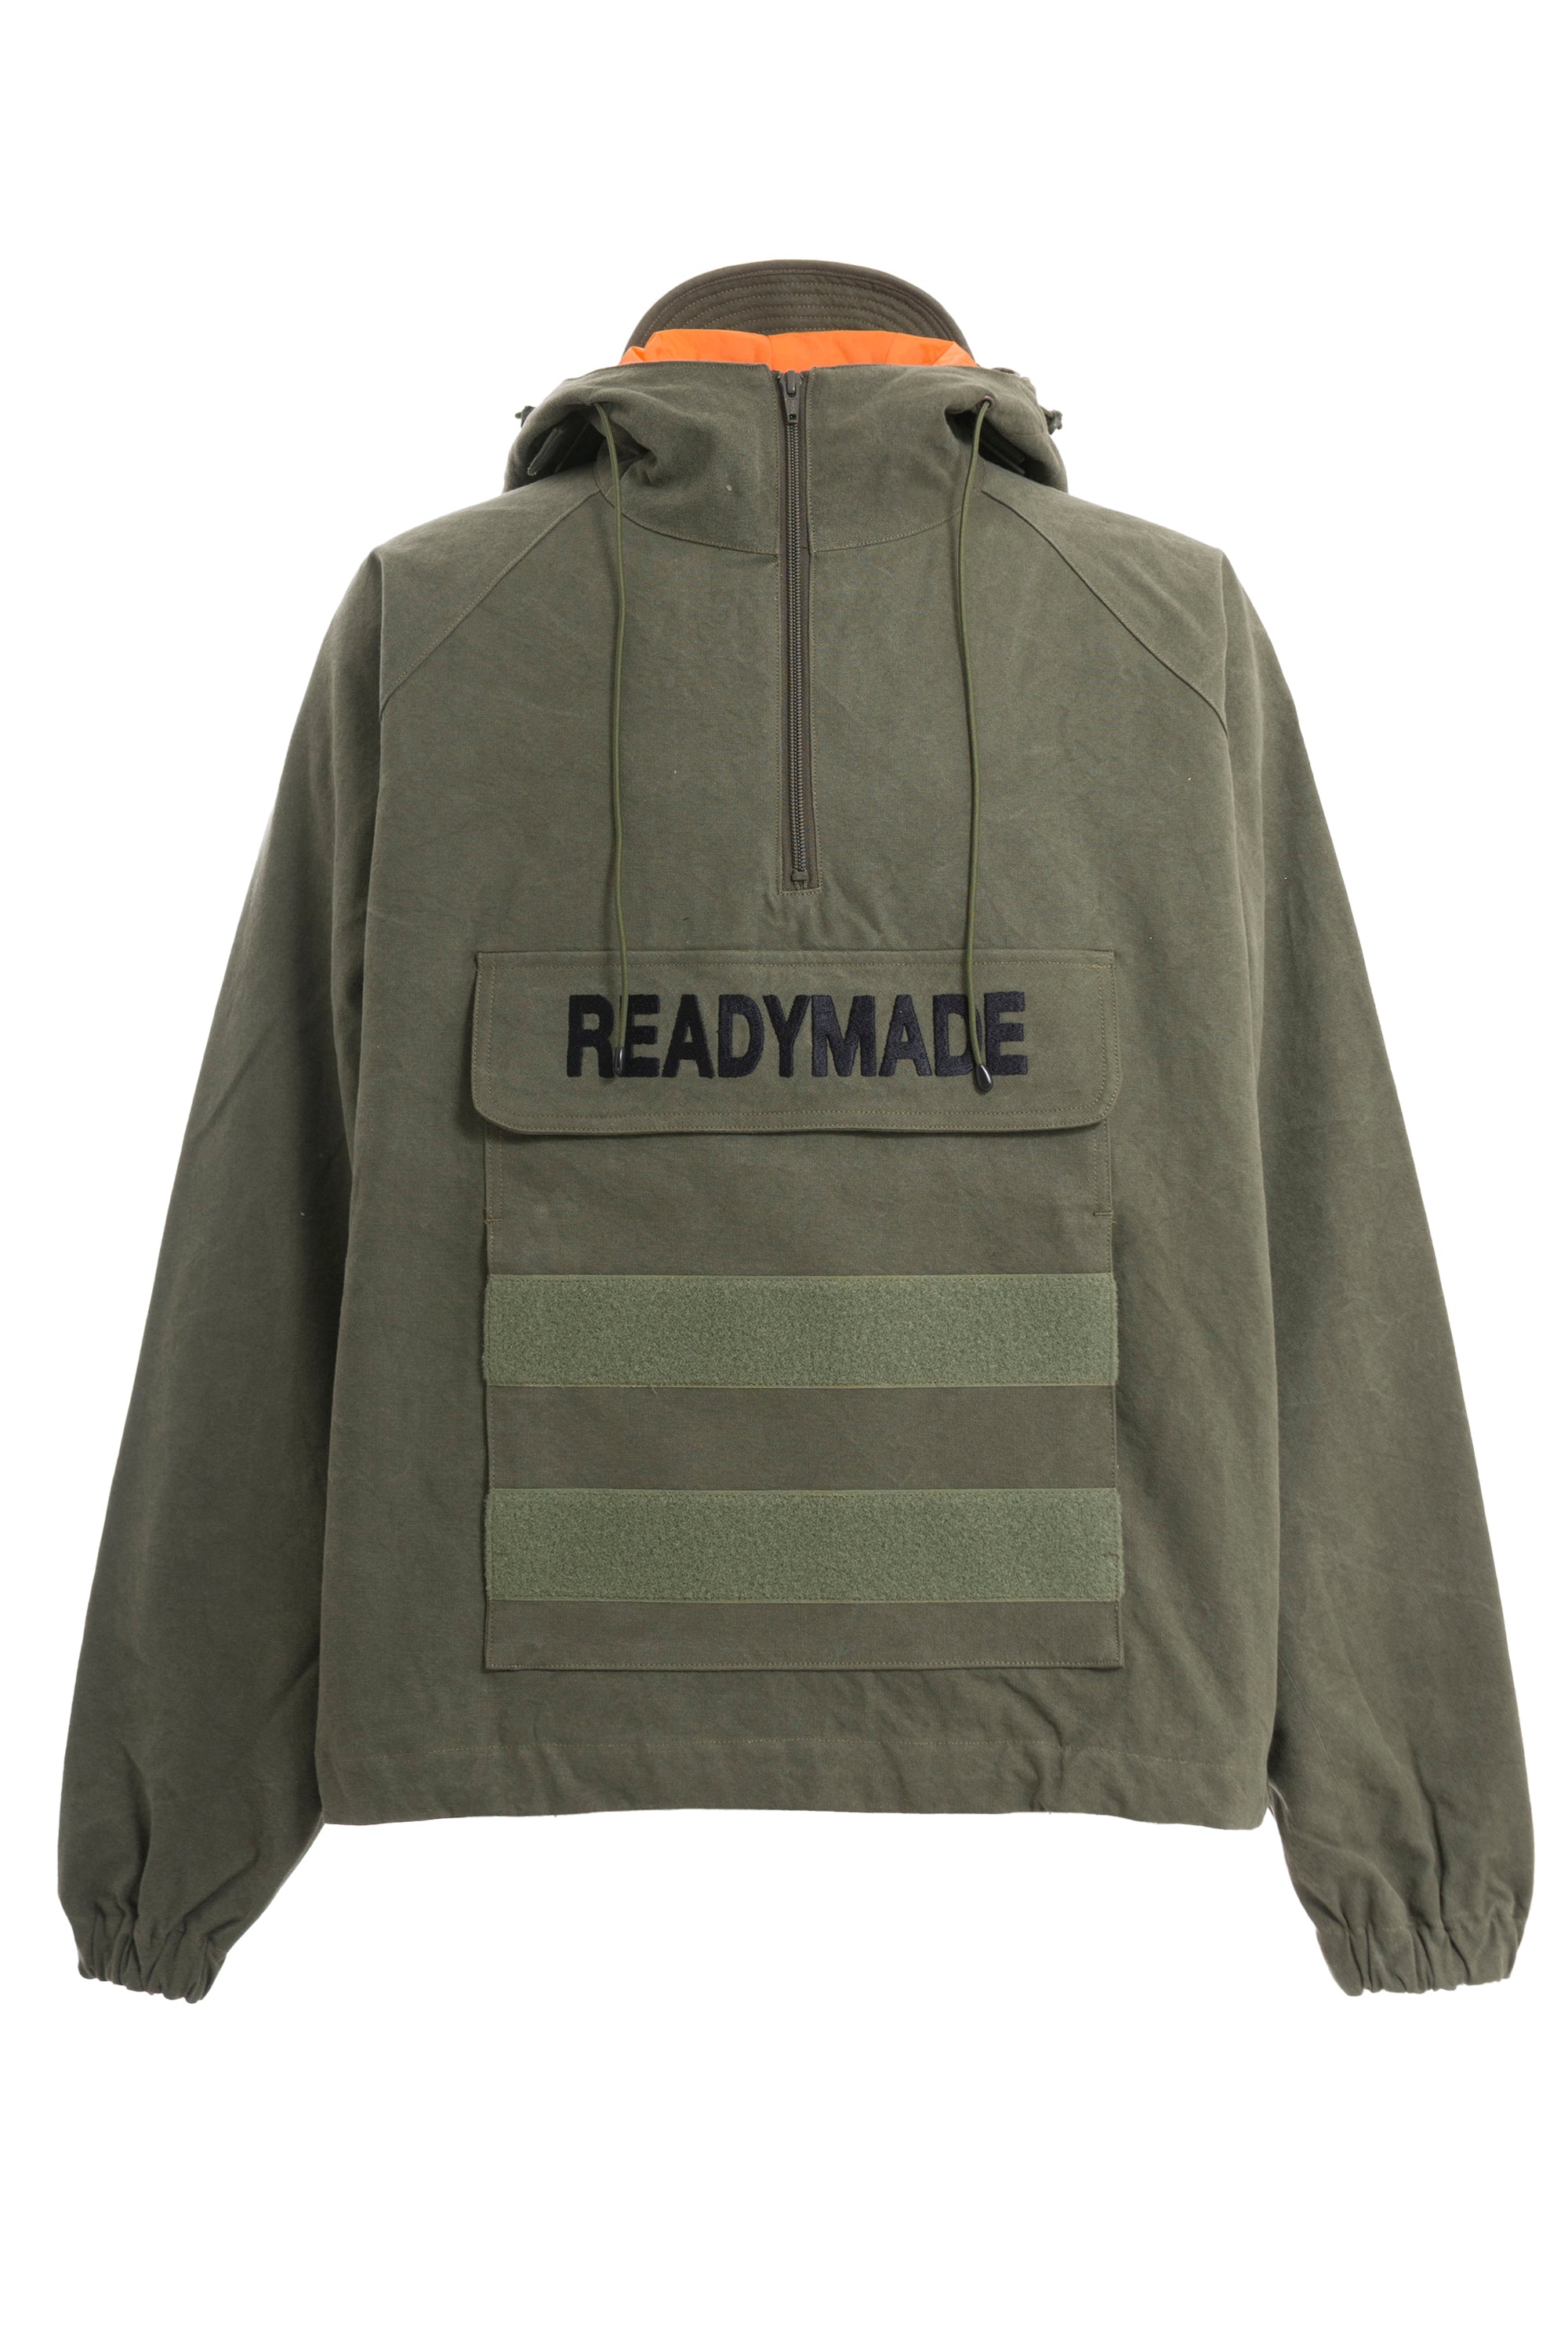 READYMADE SS23 PULLOVER JACKET / GRN -NUBIAN